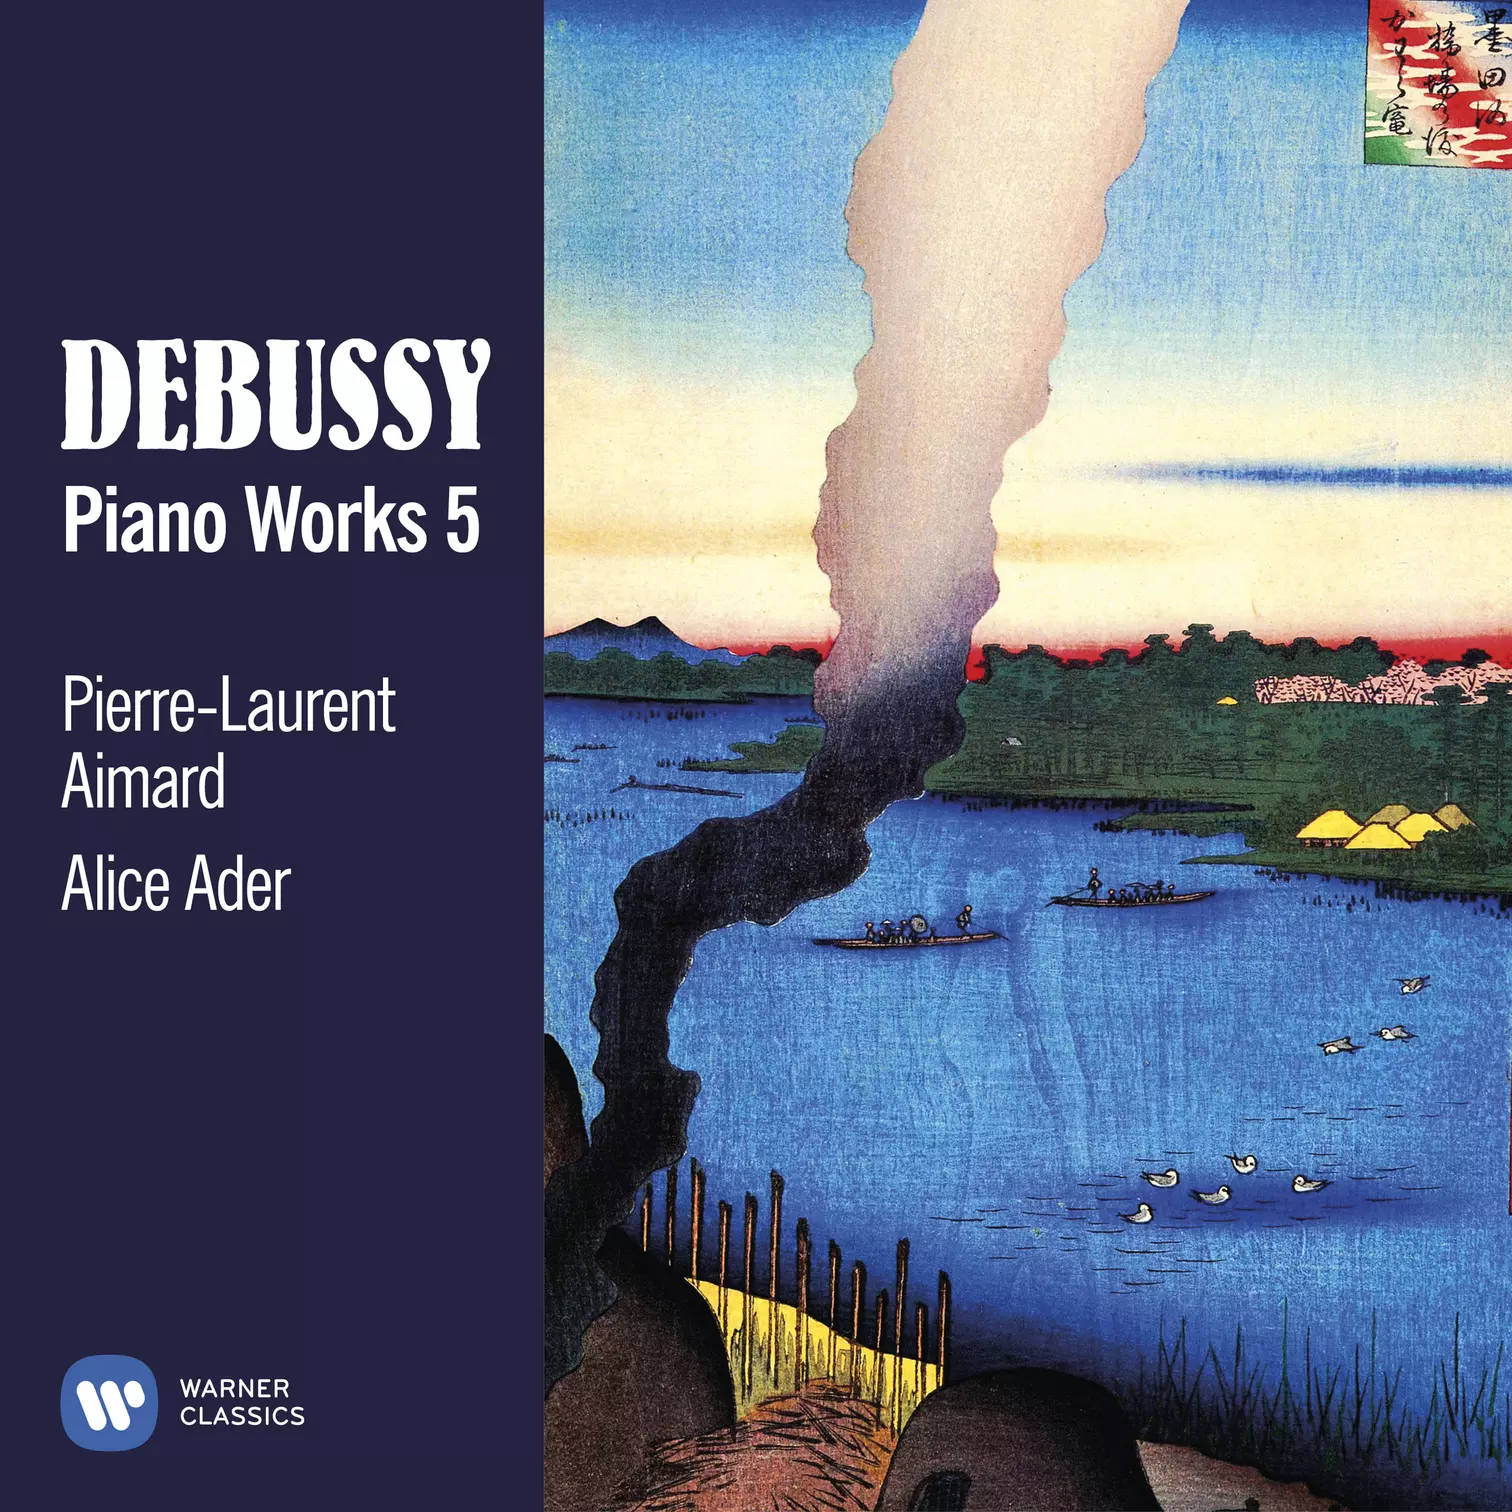 Debussy: Piano Works 5